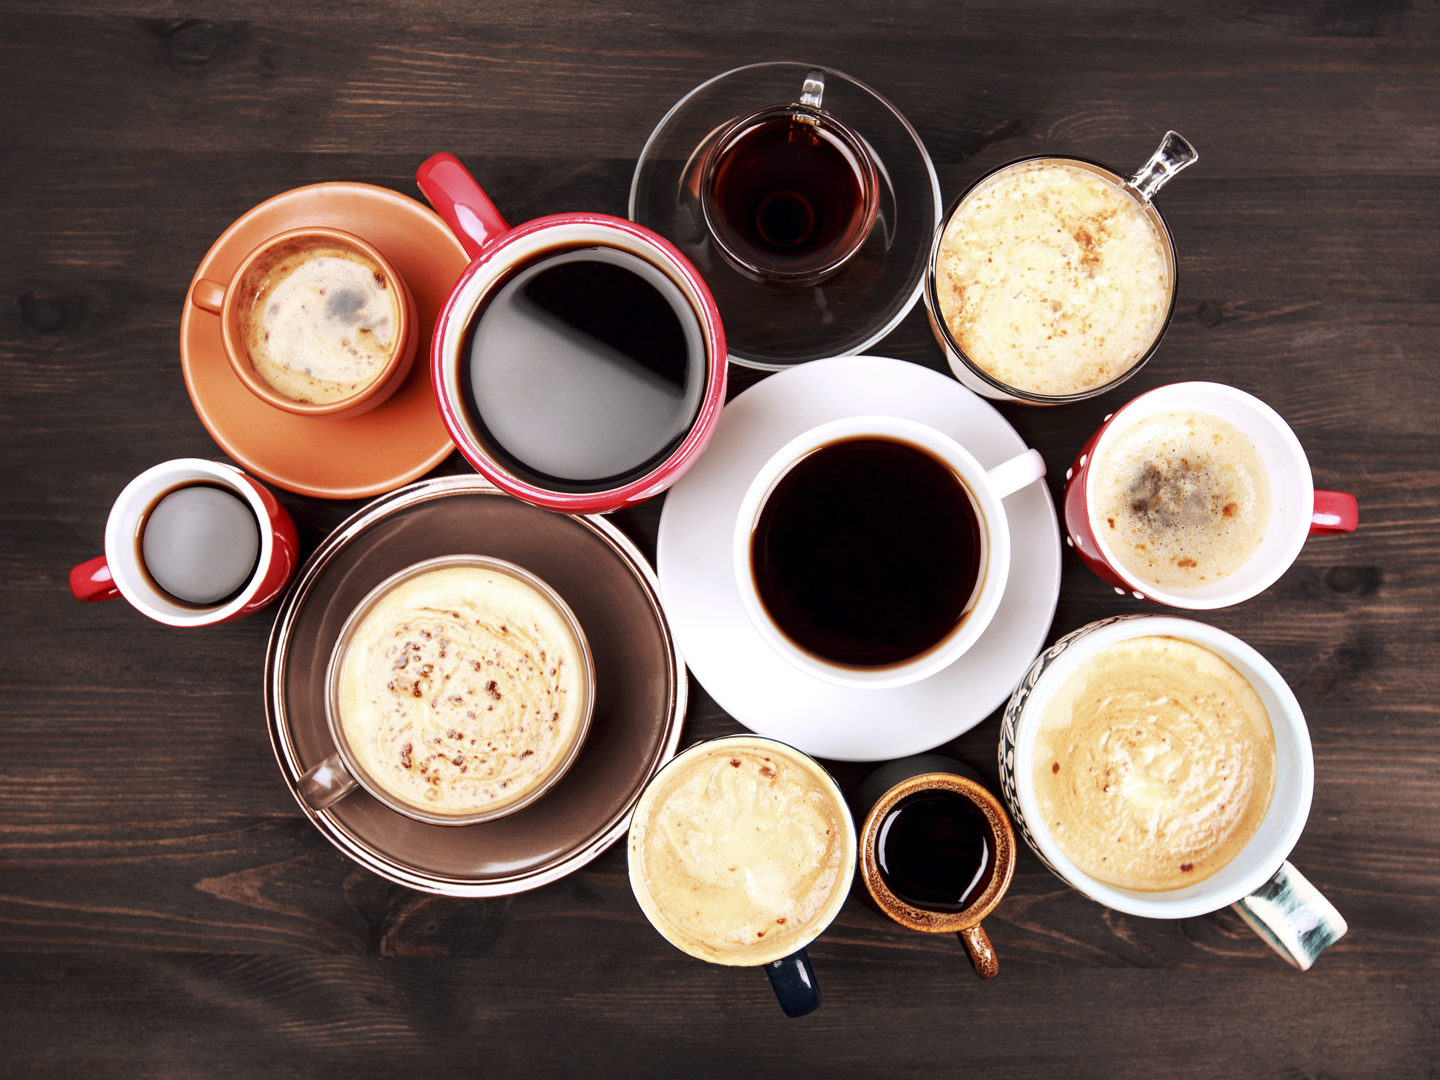 3 Ways Your Coffee May Be Making You Fat – And Better Options To Choose